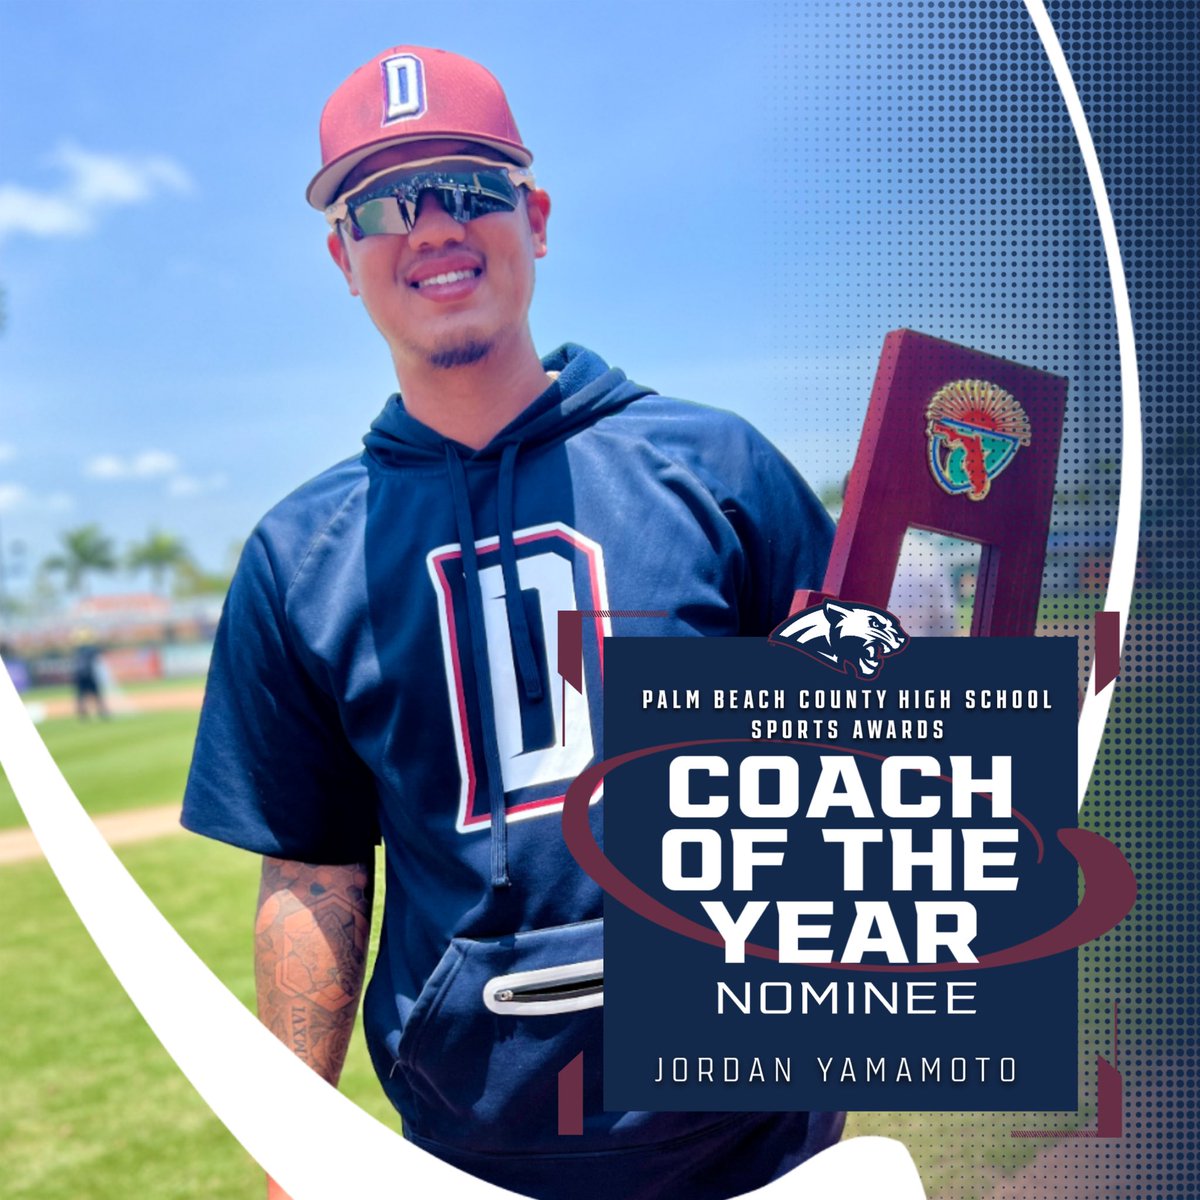 Congrats to our student-athletes who are nominees for The PB County HS Sports Awards ‘Player of the Year’ in their respective sports! In addition, Dwyer Baseball Coach Yamamoto is up for ‘Coach of the Year’. The ceremony will be held June 5th at 6pm at the PB Co Convention Center